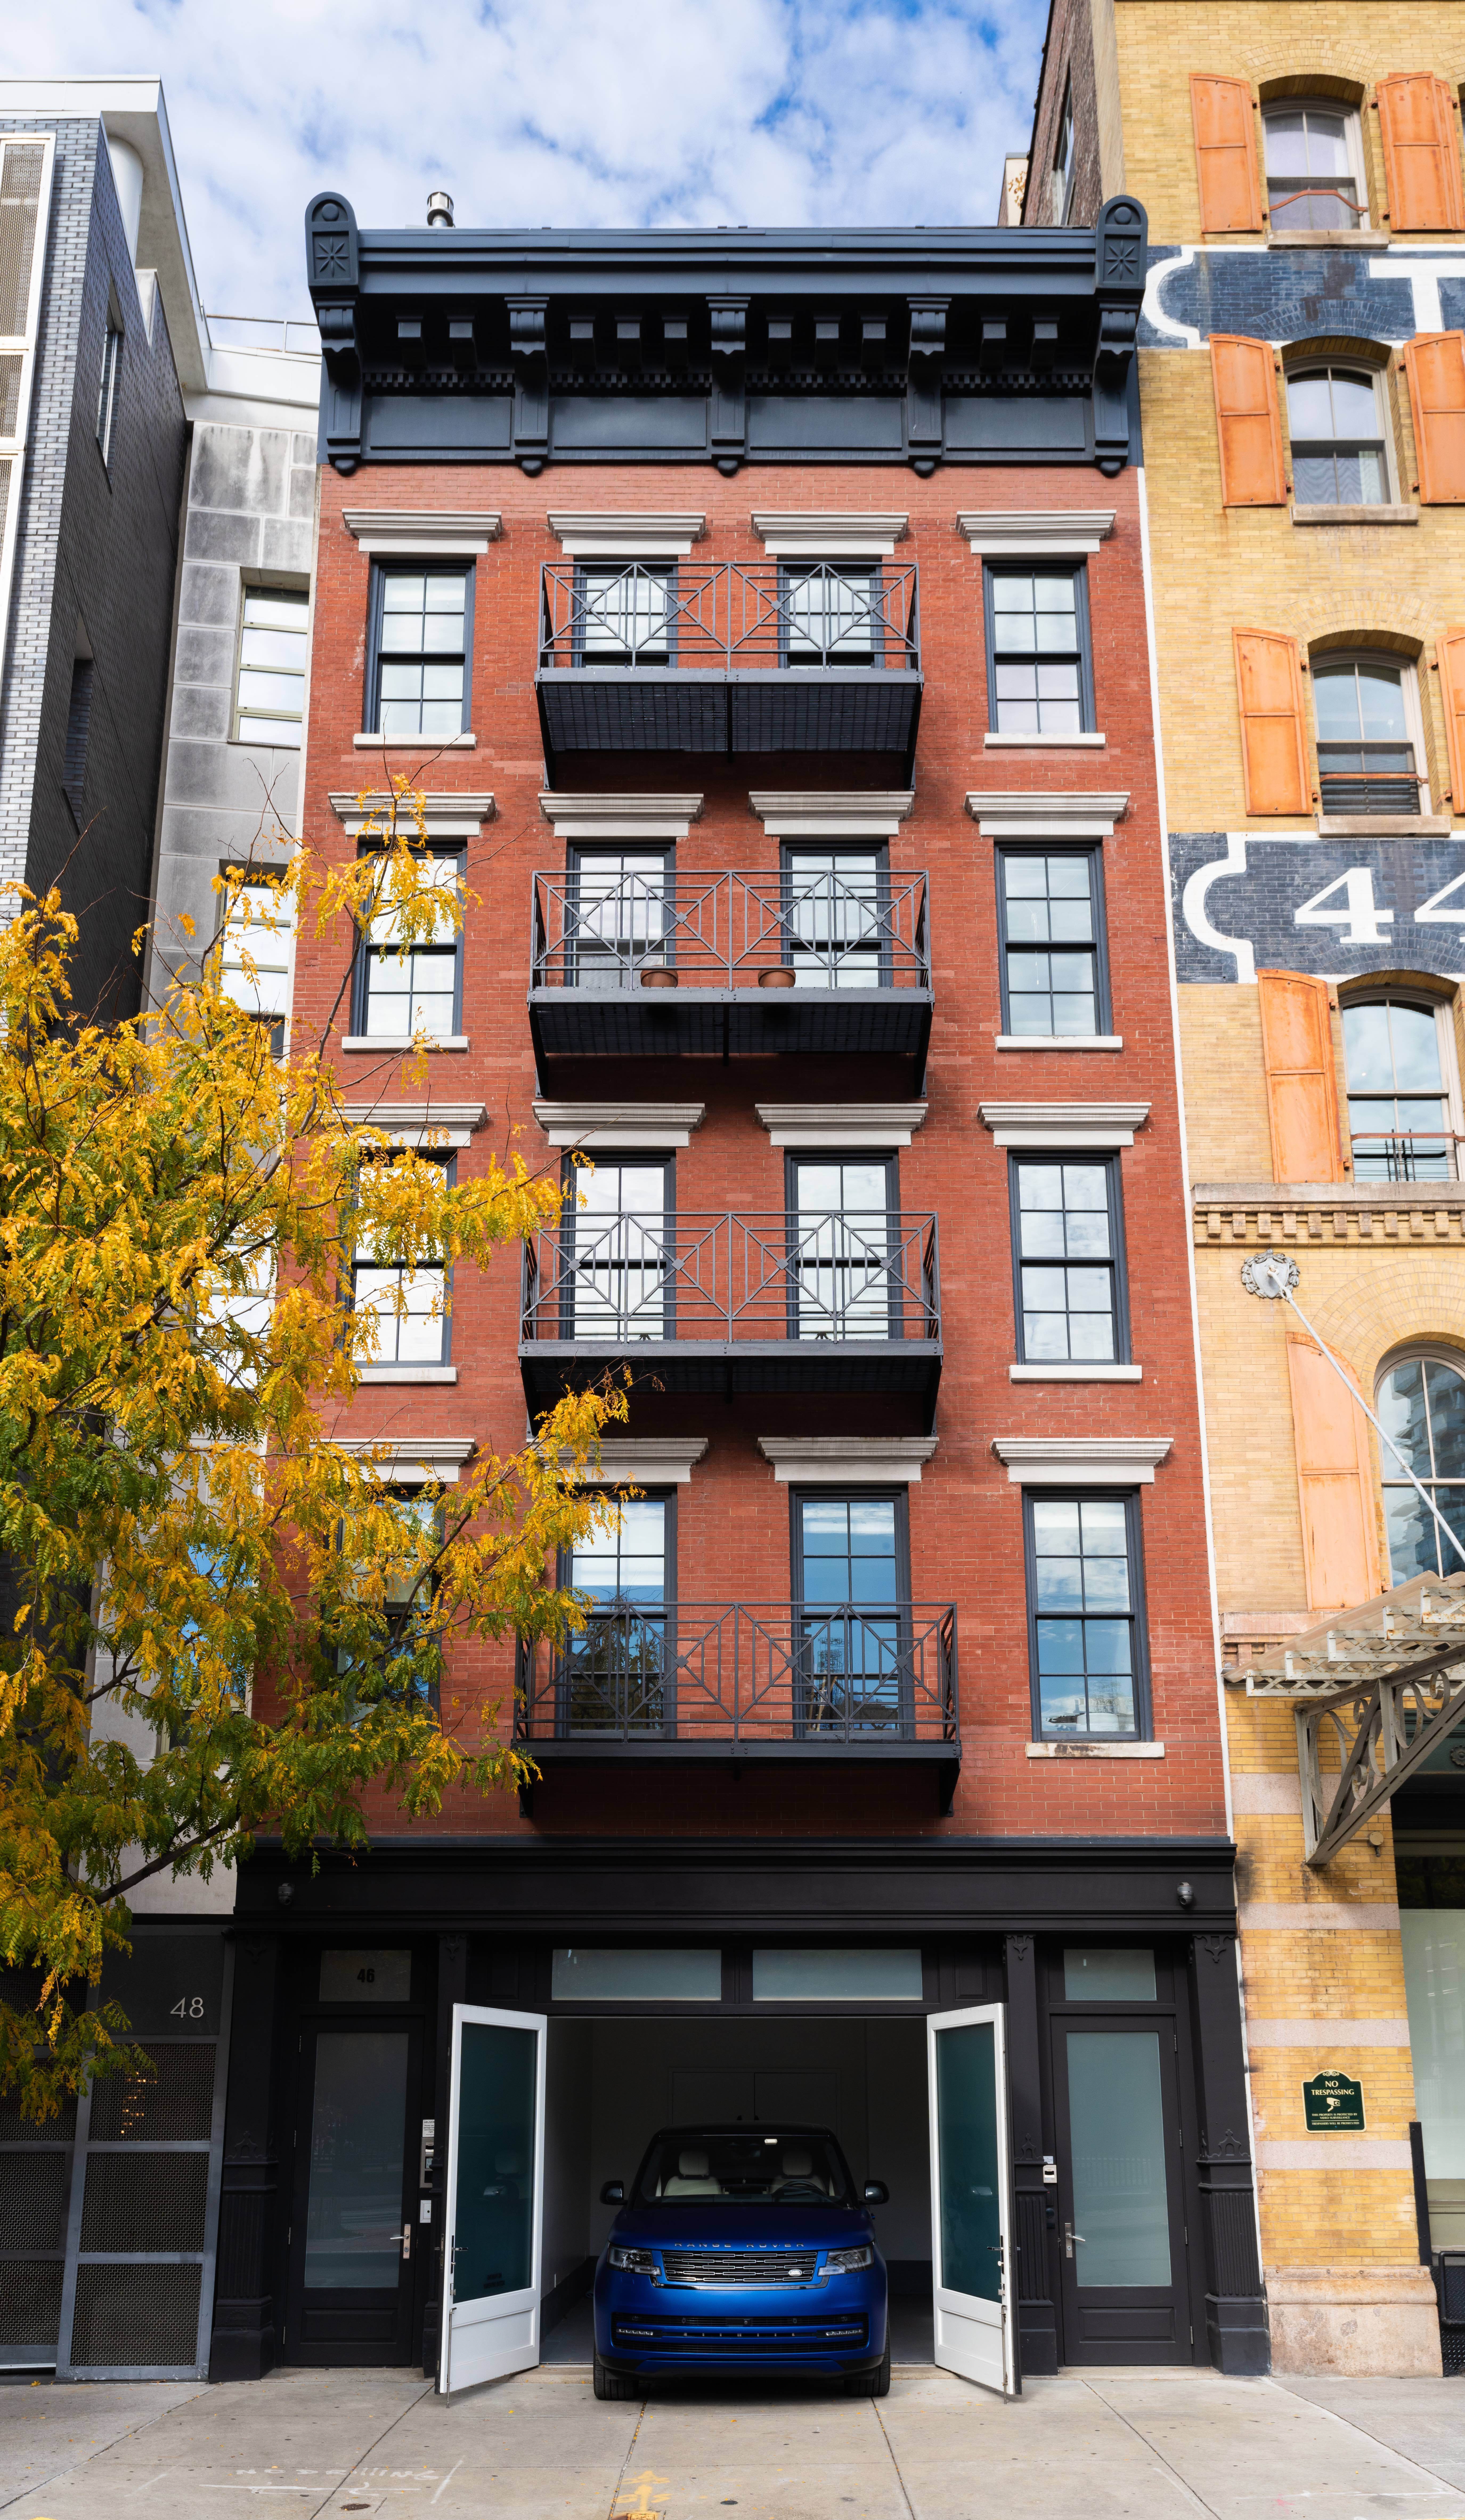 46 Laight Street, Tribeca, Downtown, NYC - 11 Bedrooms  
10.5 Bathrooms  
20 Rooms - 